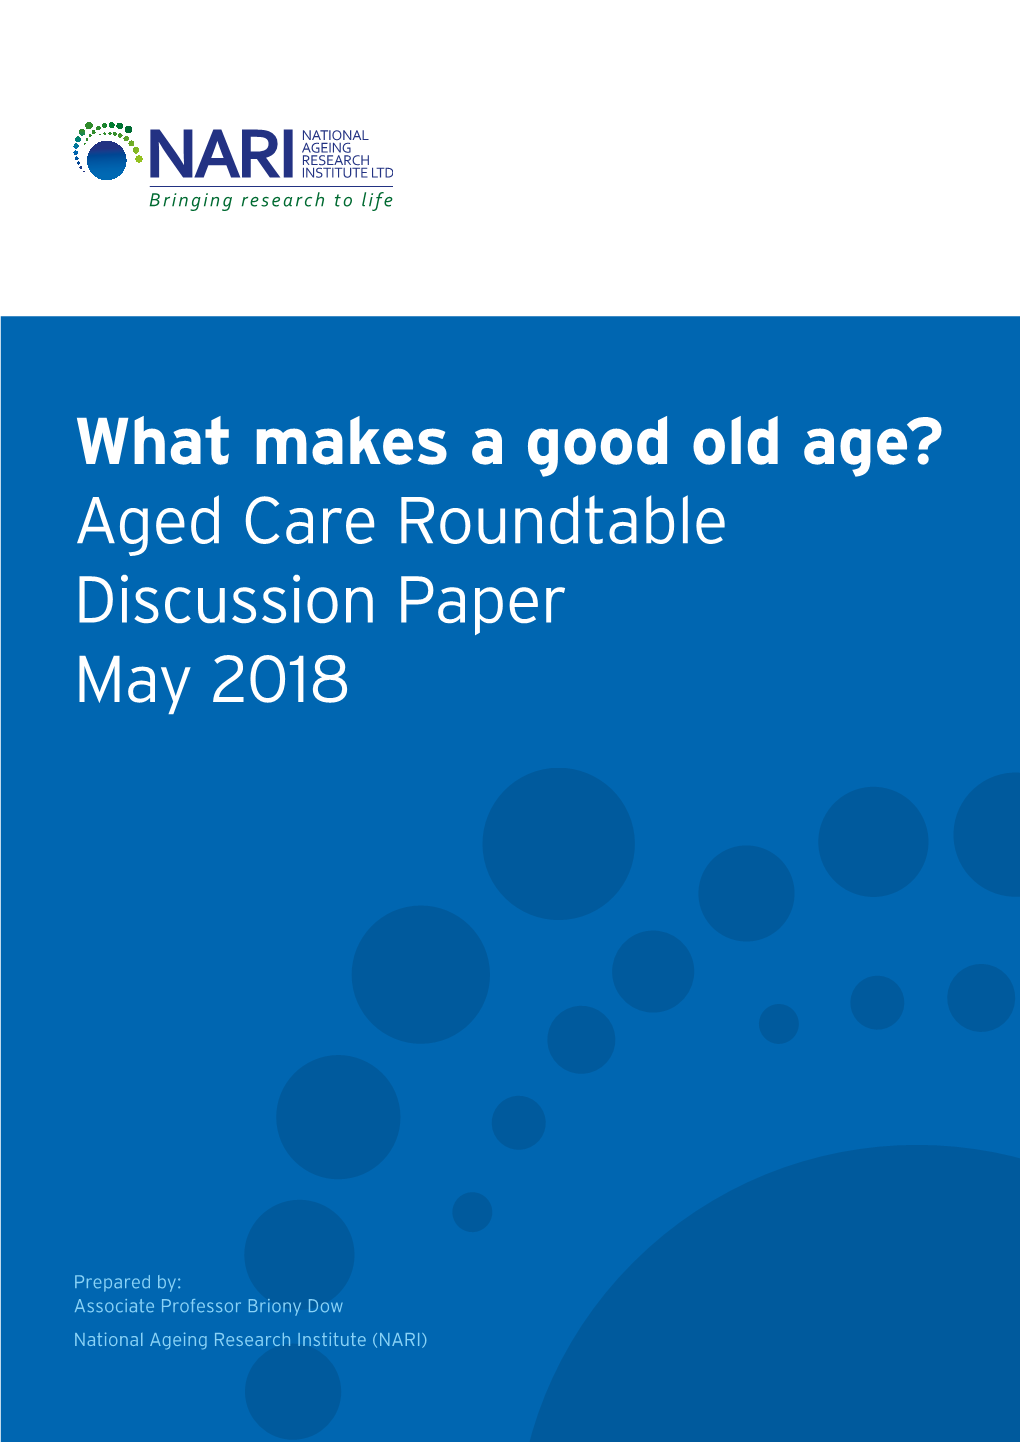 Aged Care Roundtable Discussion Paper May 2018